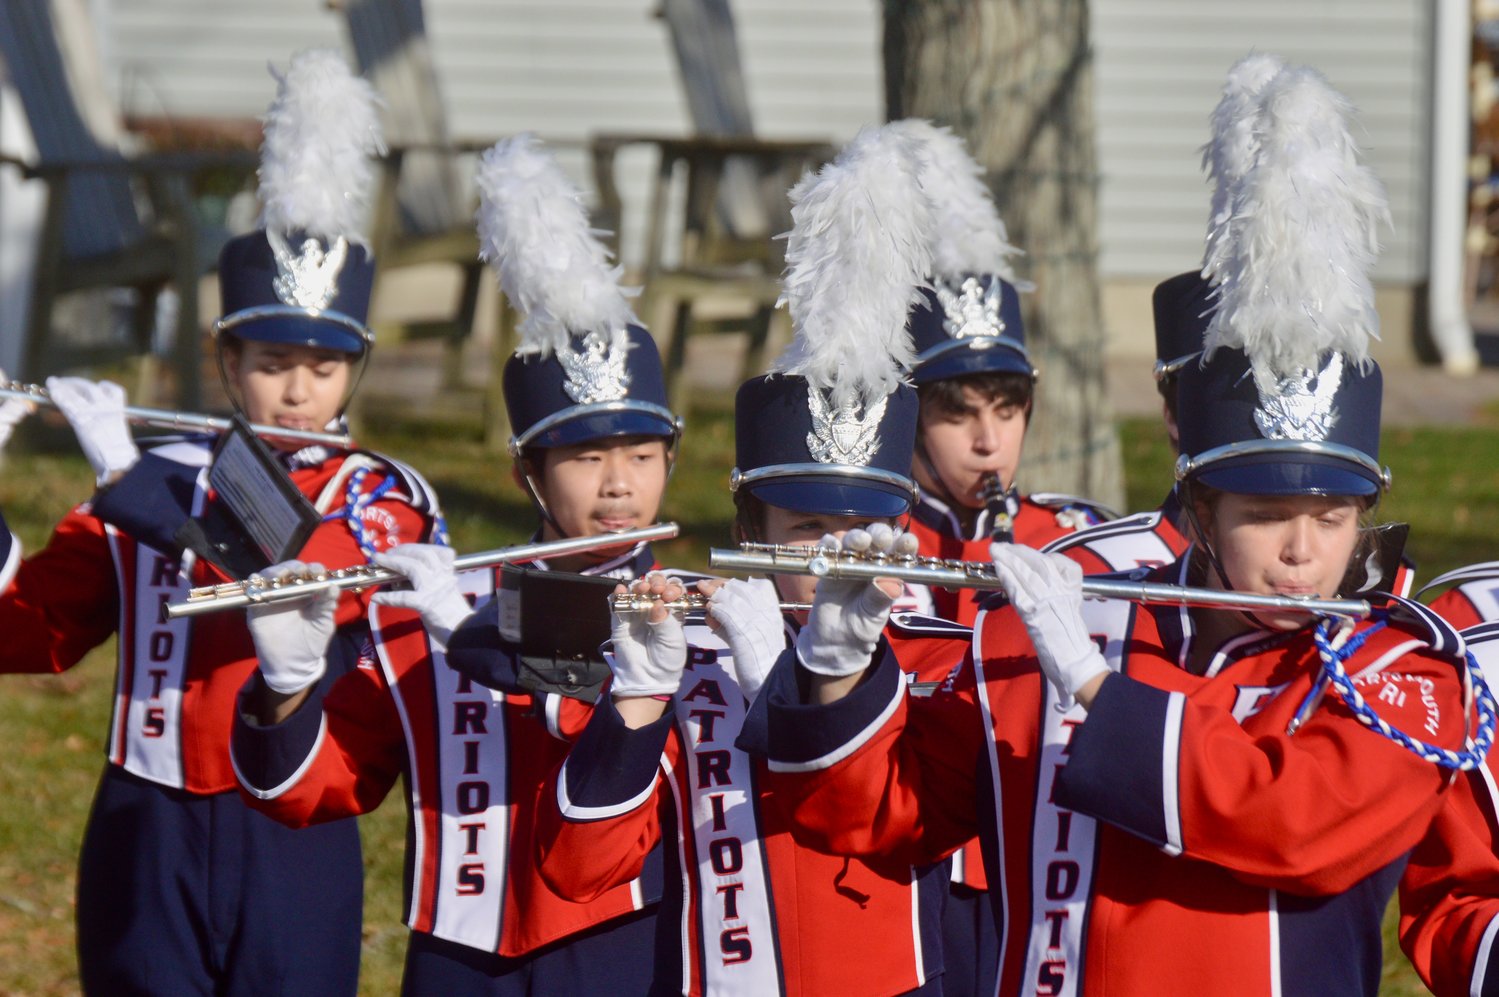 Members of the PHS Marching Band warm up near Stone Bridge before the short Veterans Day parade.